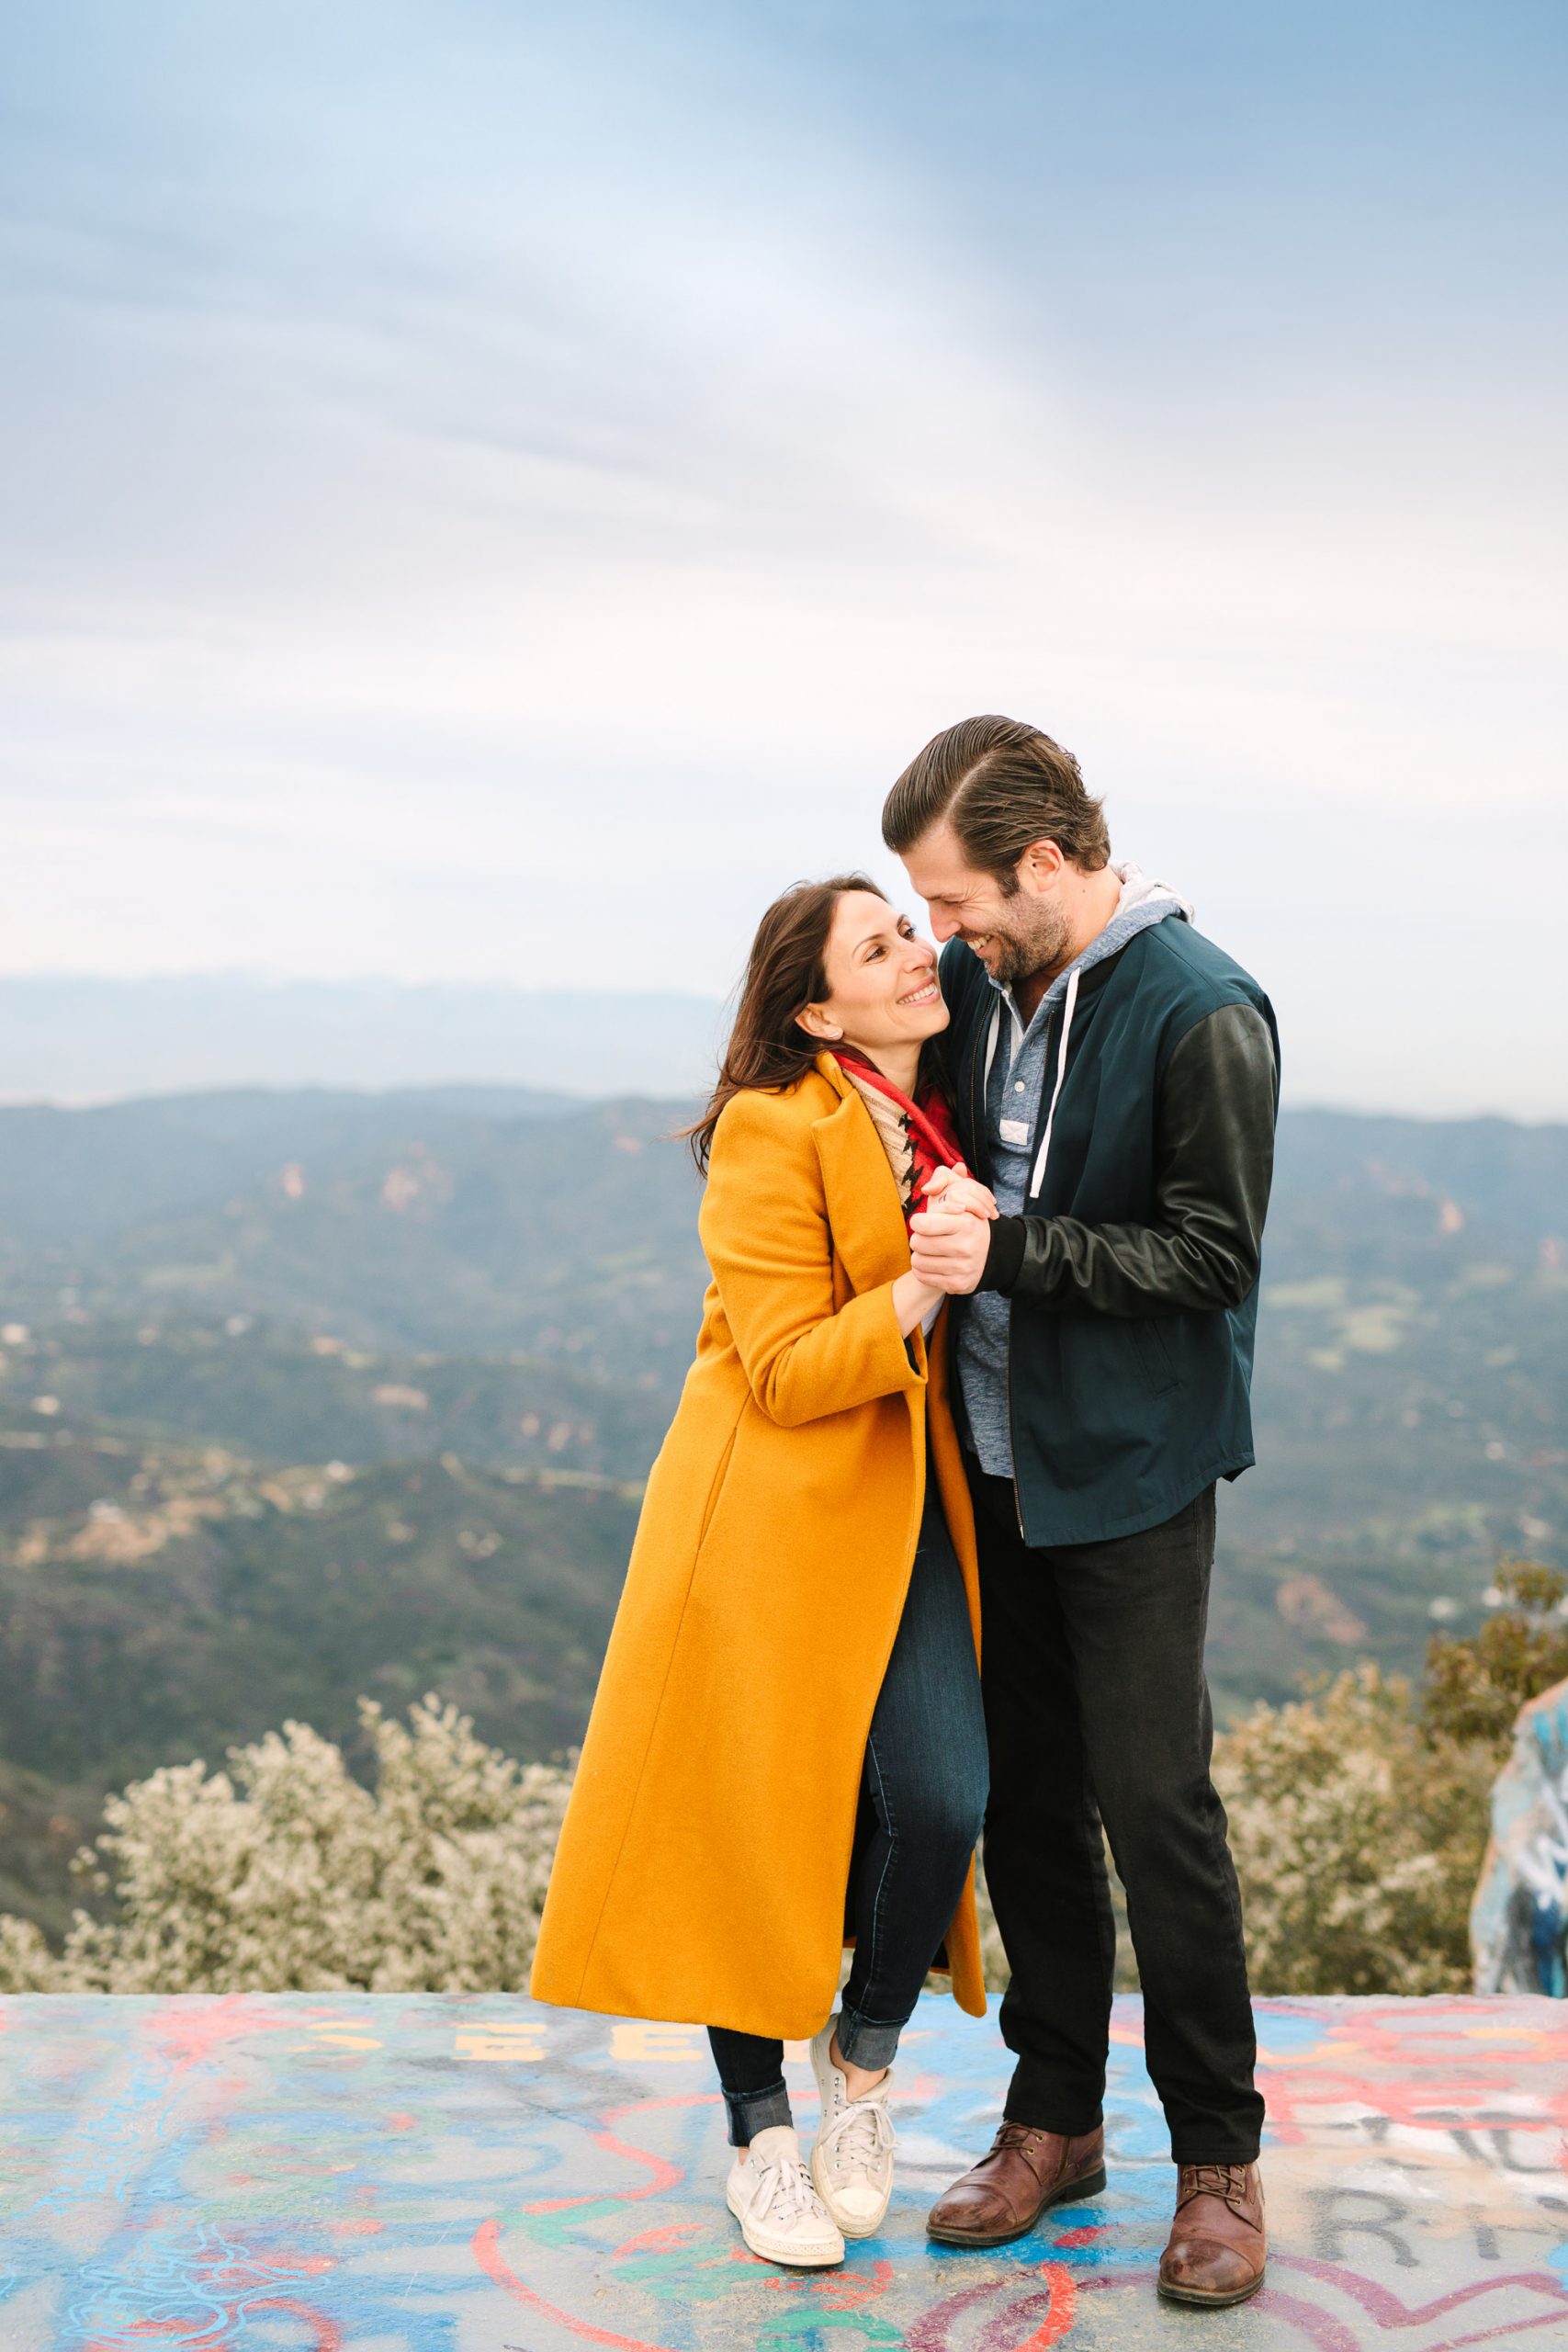 Autumn engagement session in Topanga, CA by Mary Costa Photography